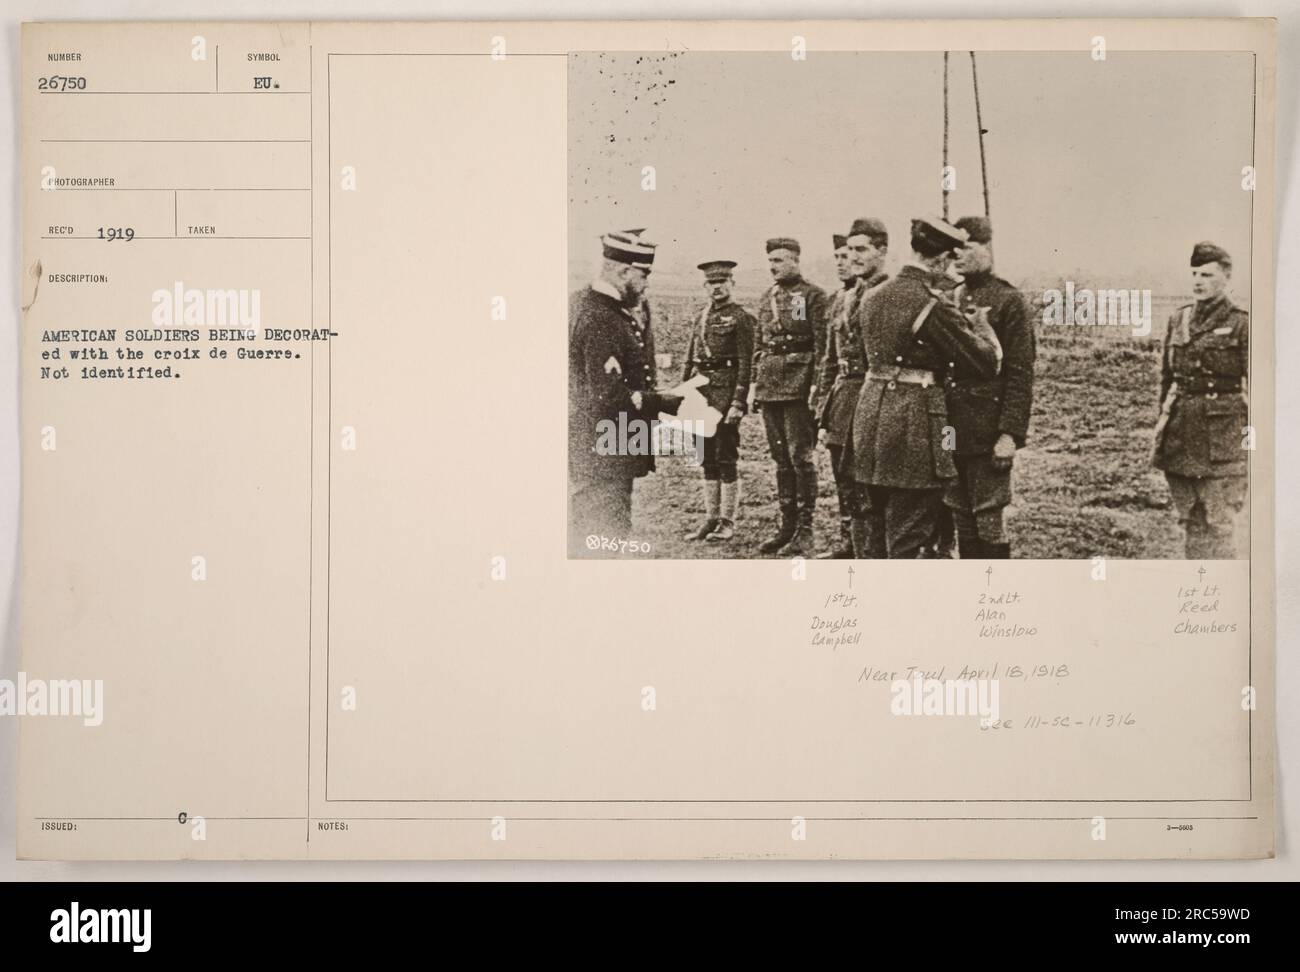 American soldiers receiving the croix de Guerre. Date: 1919. Not identified individuals. Additional information: Douglas Campbell near Toul and Alan Winslow on April 18, 1918. More details can be found in file /11-5c-11316 4 Reed Chambers 3. Stock Photo